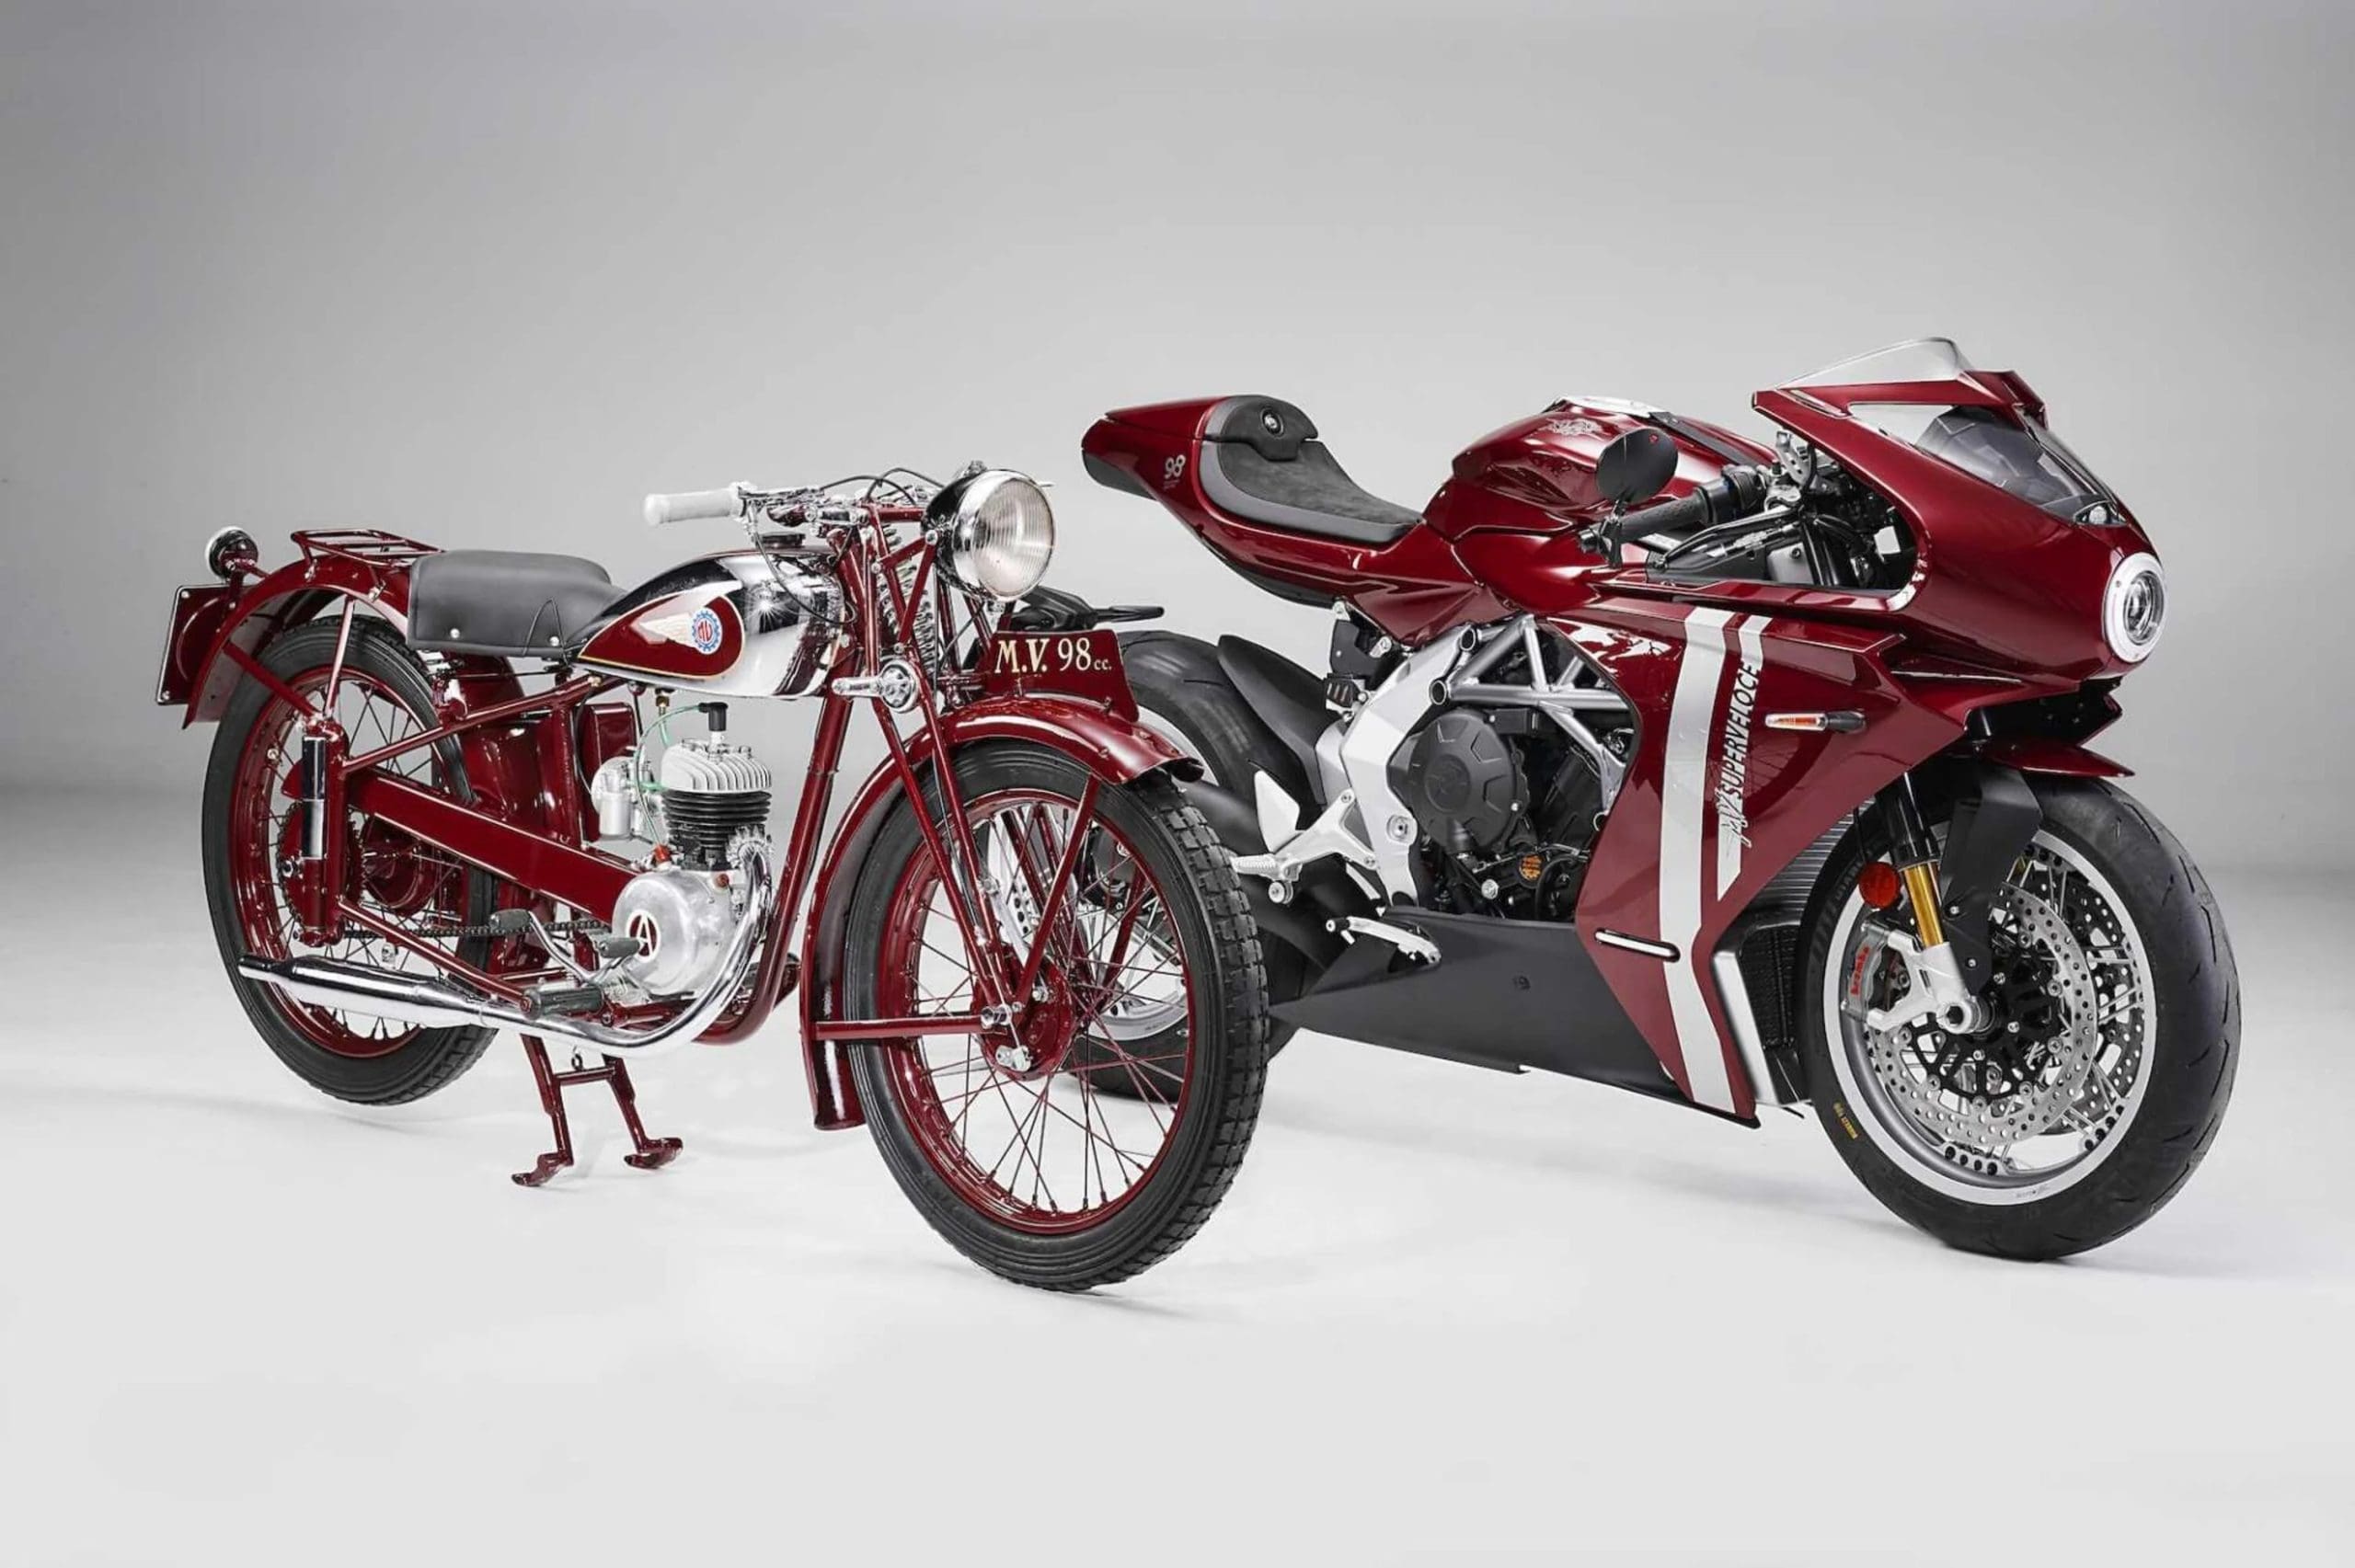 A view of MV Agusta's Superveloce 98 Edizione Limitata next to the company's very first motorcycle, the MV 98. All media provided by MV Agusta.